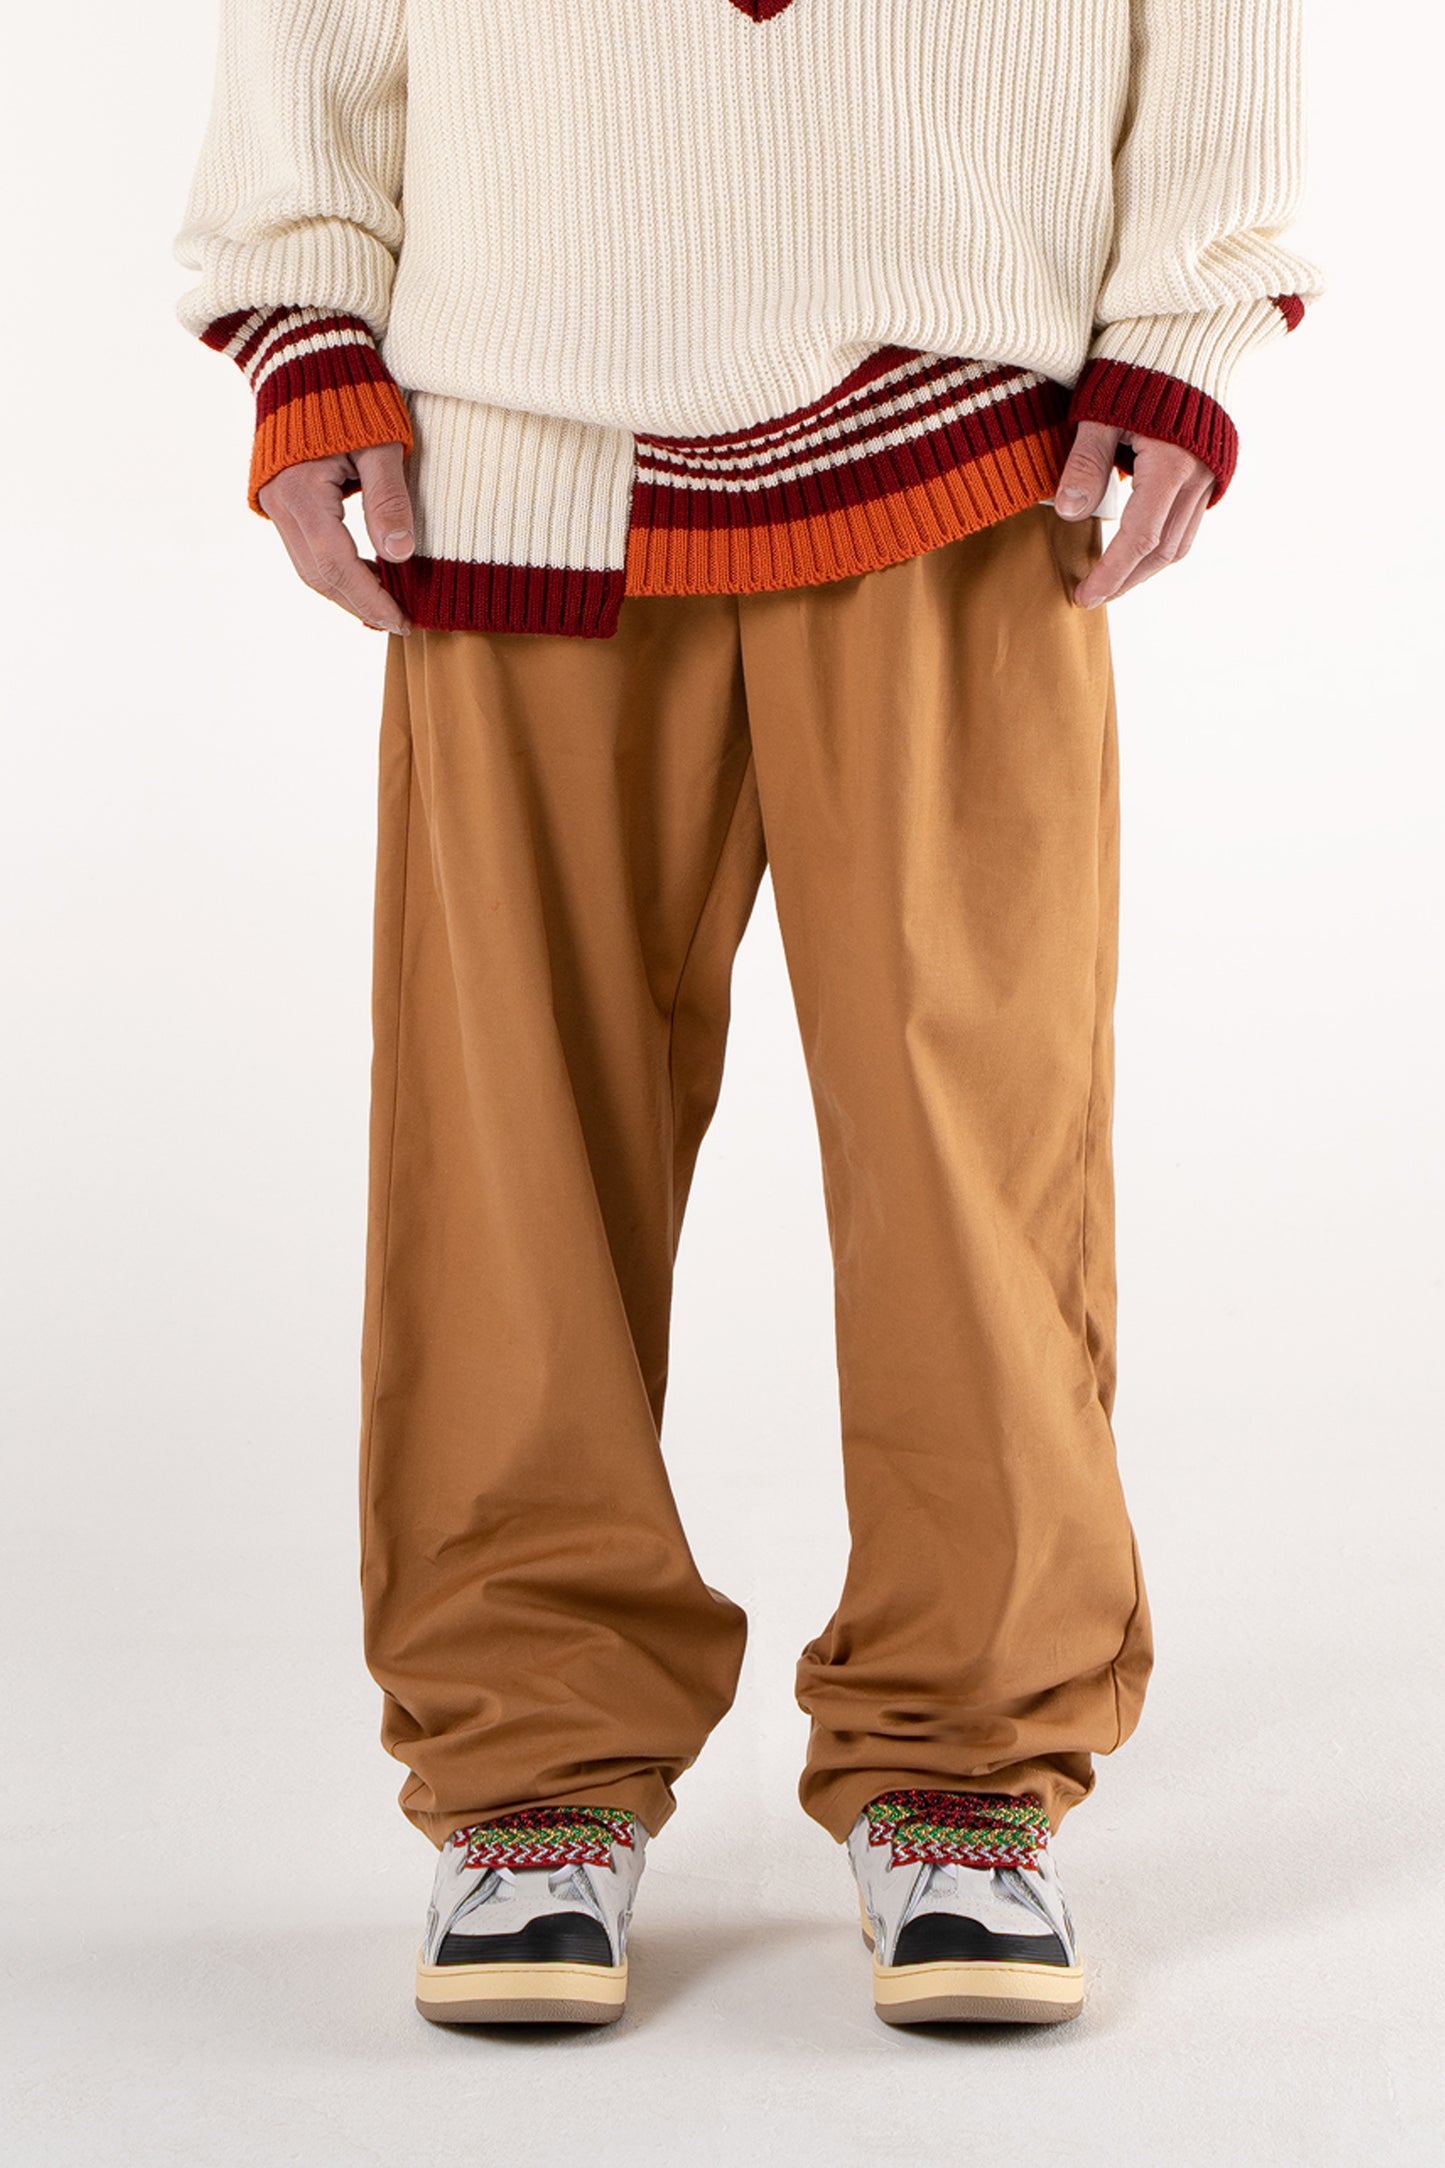 Pleated Pants - Camel